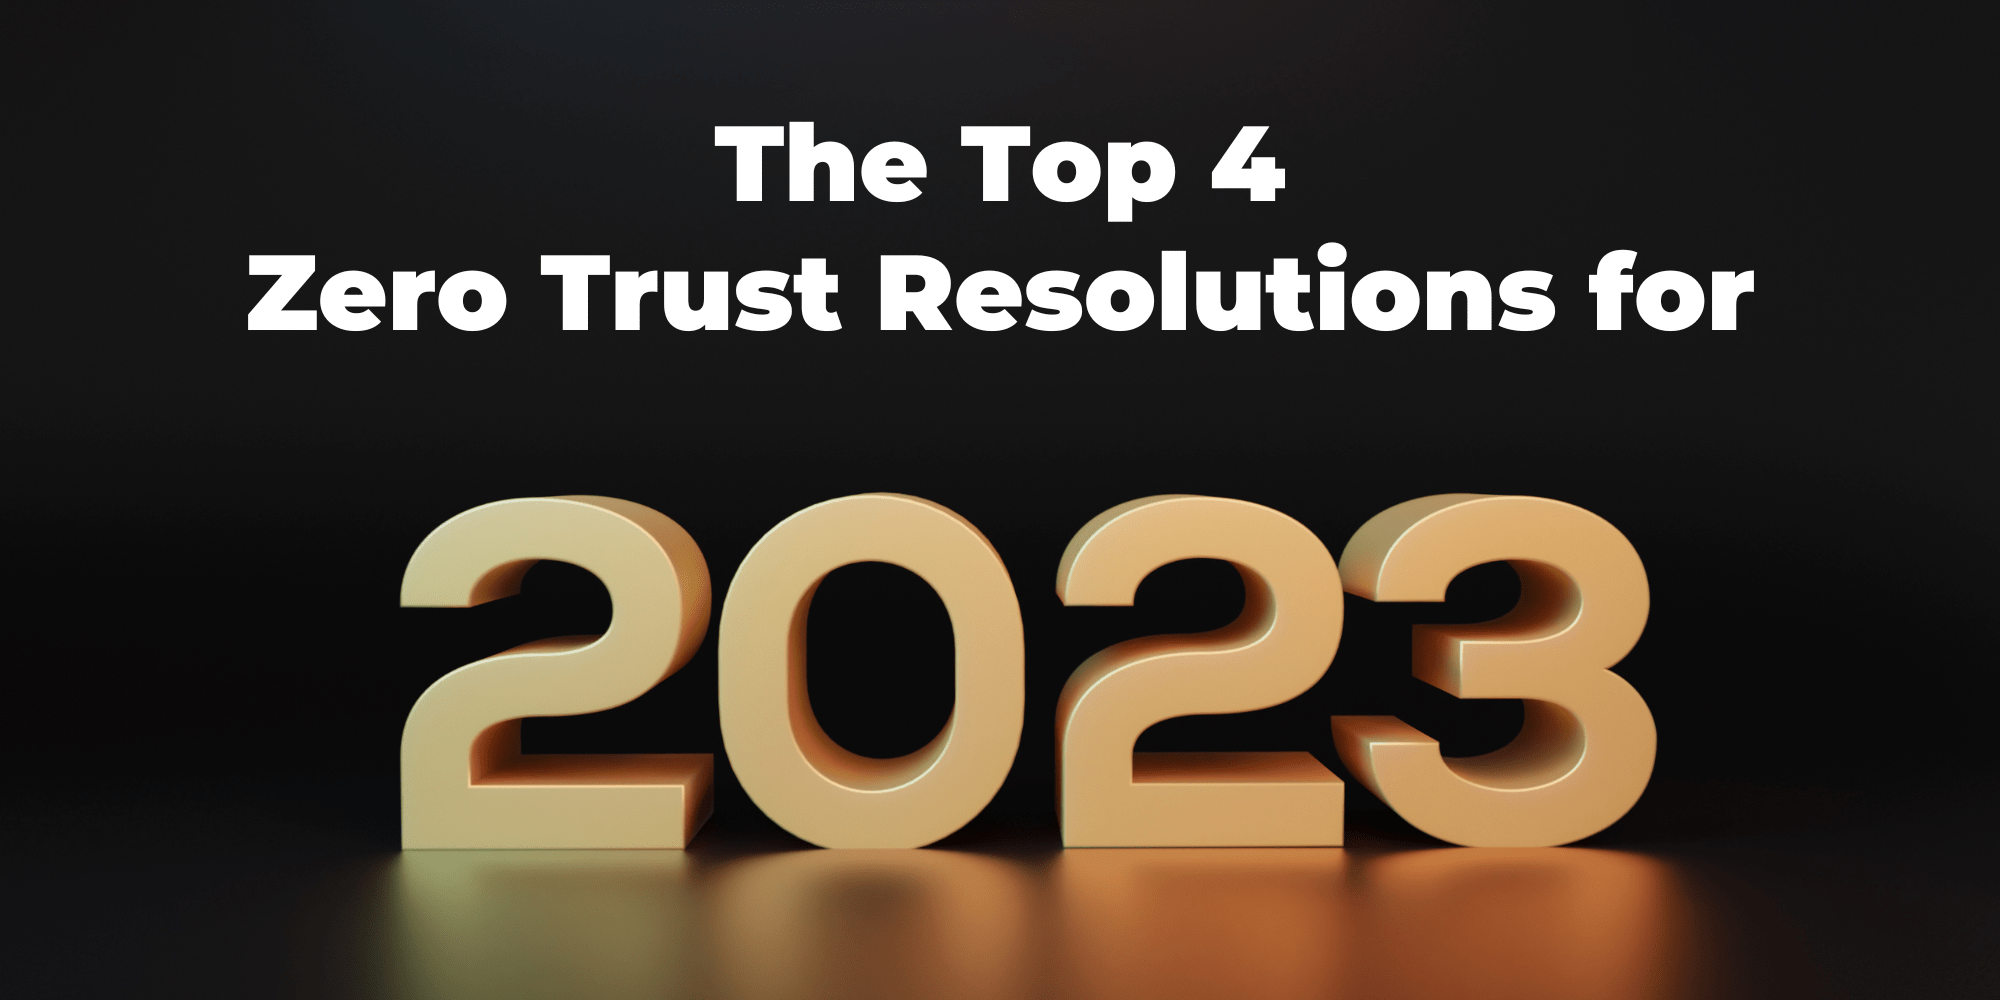 Zero Trust Resolutions for 2023 featured image